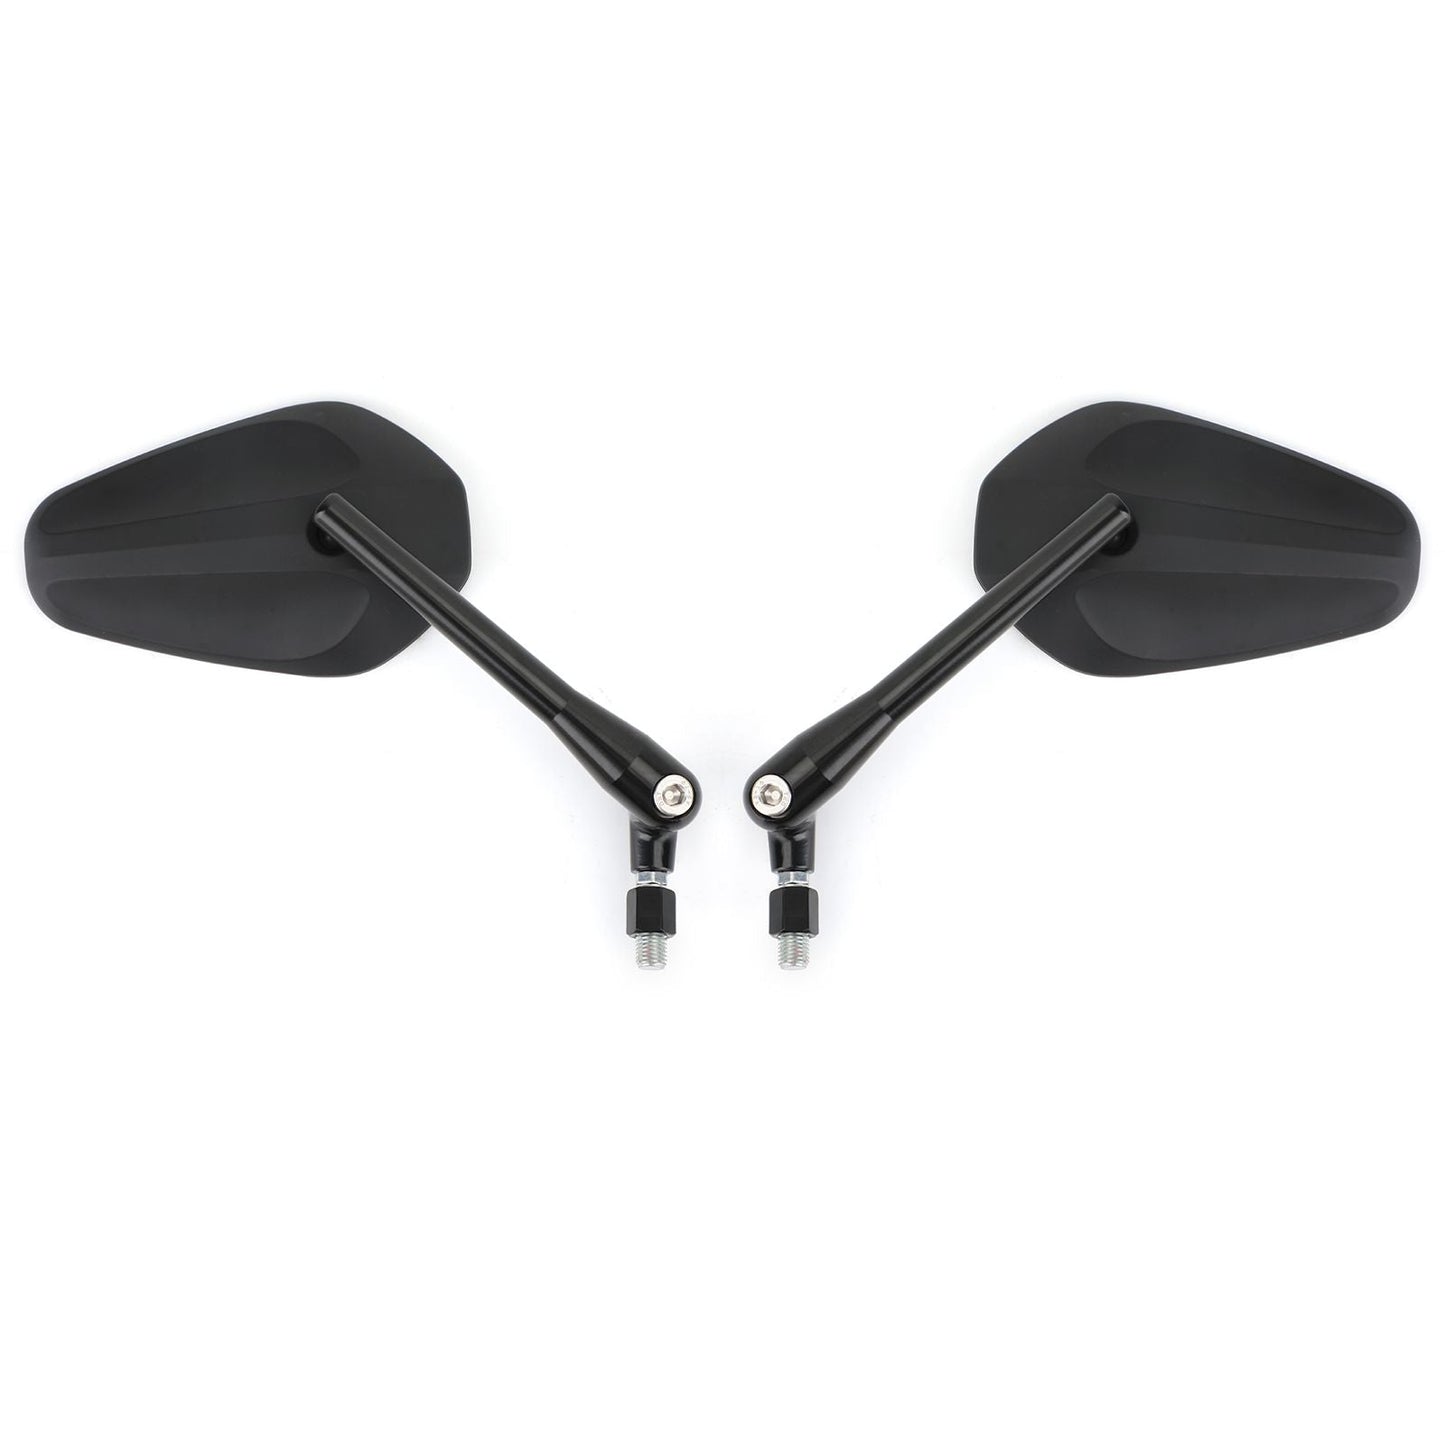 Pair M10 Rearview Mirror for Motorcycle Custom Cruiser Cafe Racer UNIVERSAL